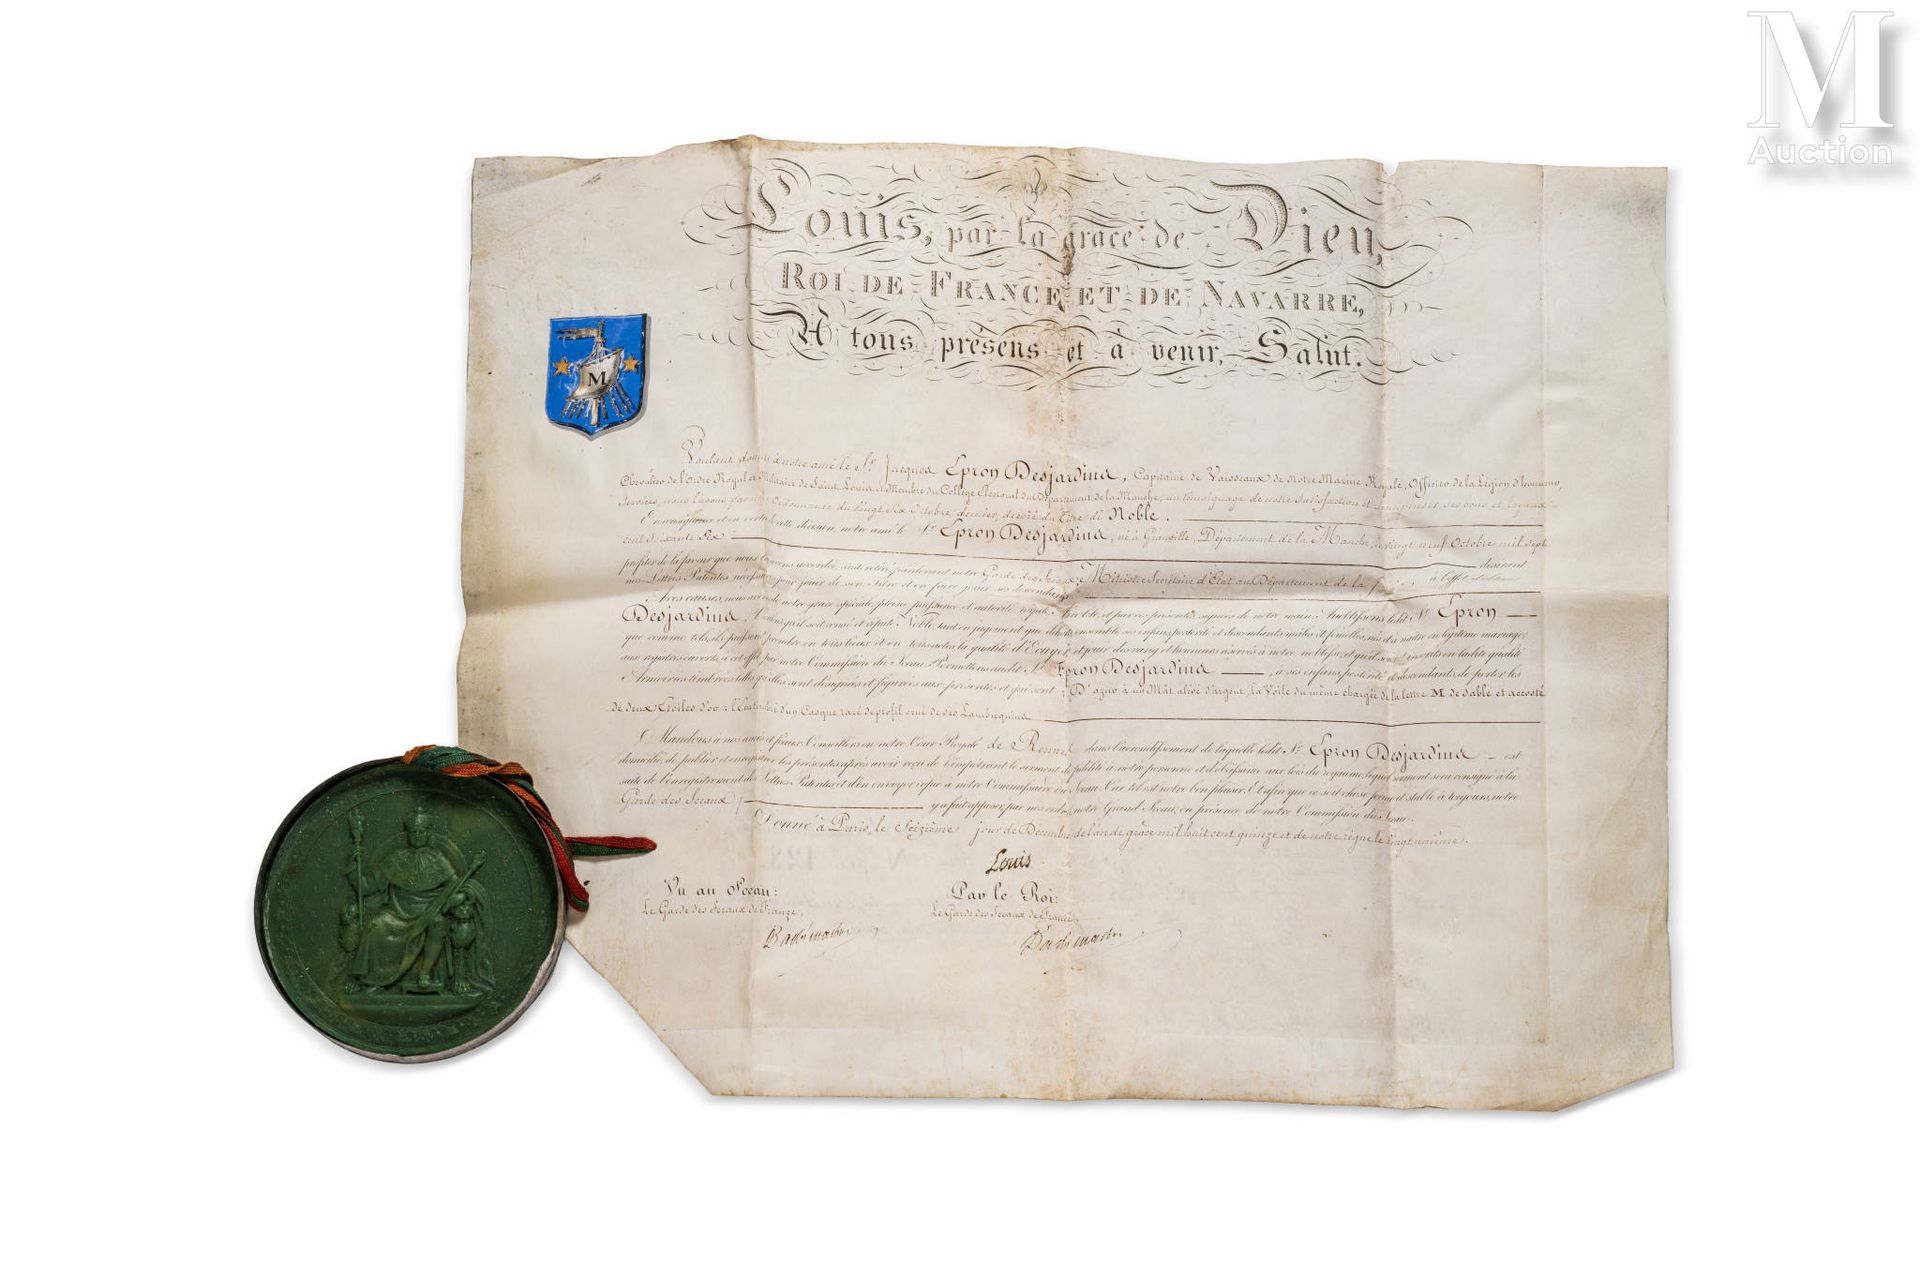 LOUIS XVIII (1755-1824) Letters patent of ennoblement by King Louis XVIII for Ca&hellip;